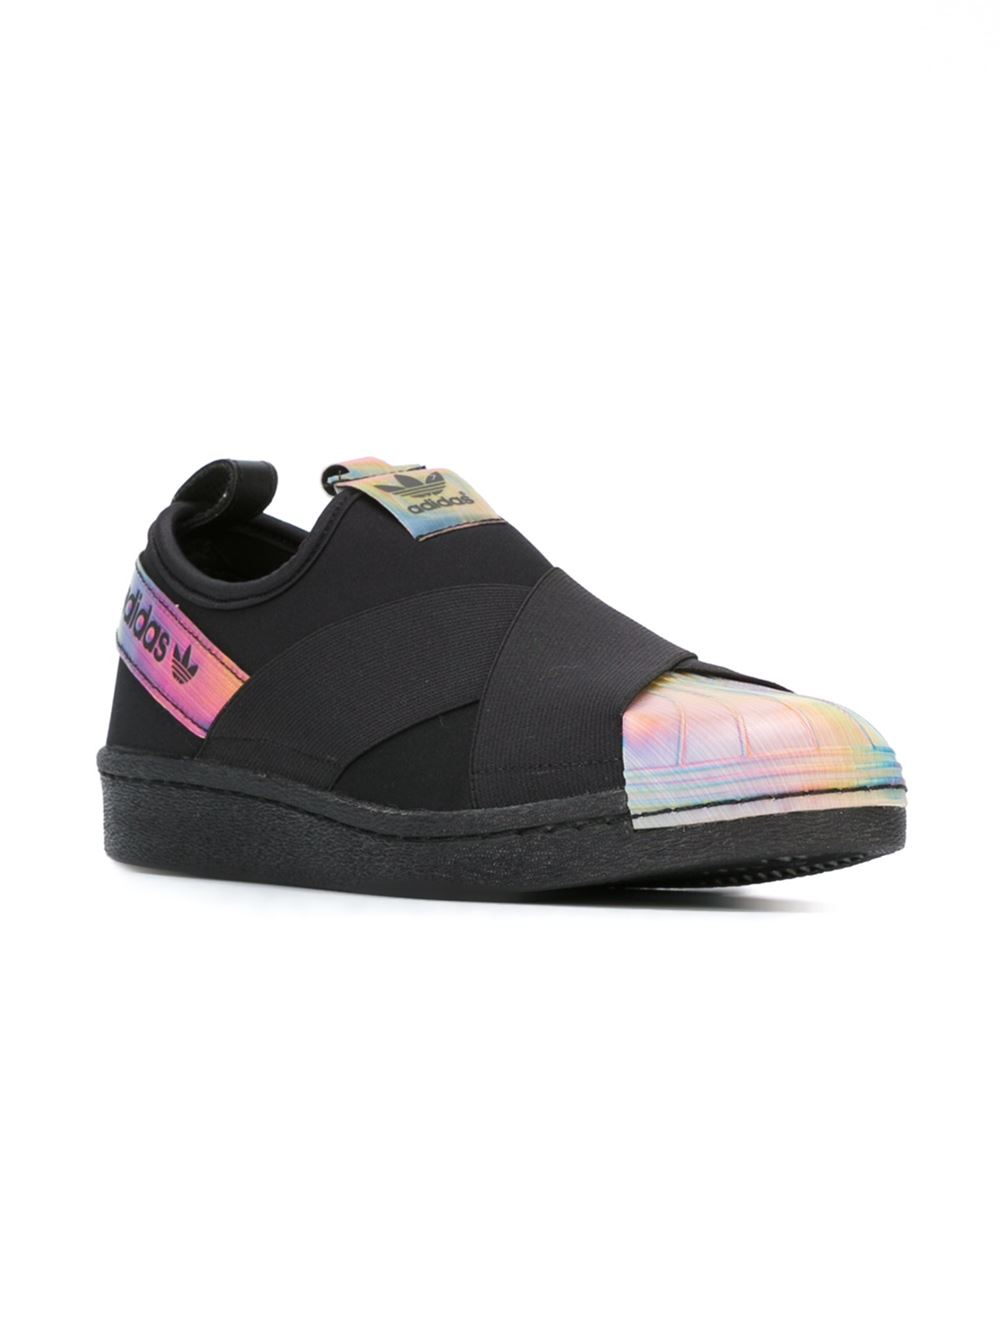 adidas Superstar Leather Slip-On Sneakers in Black - Lyst